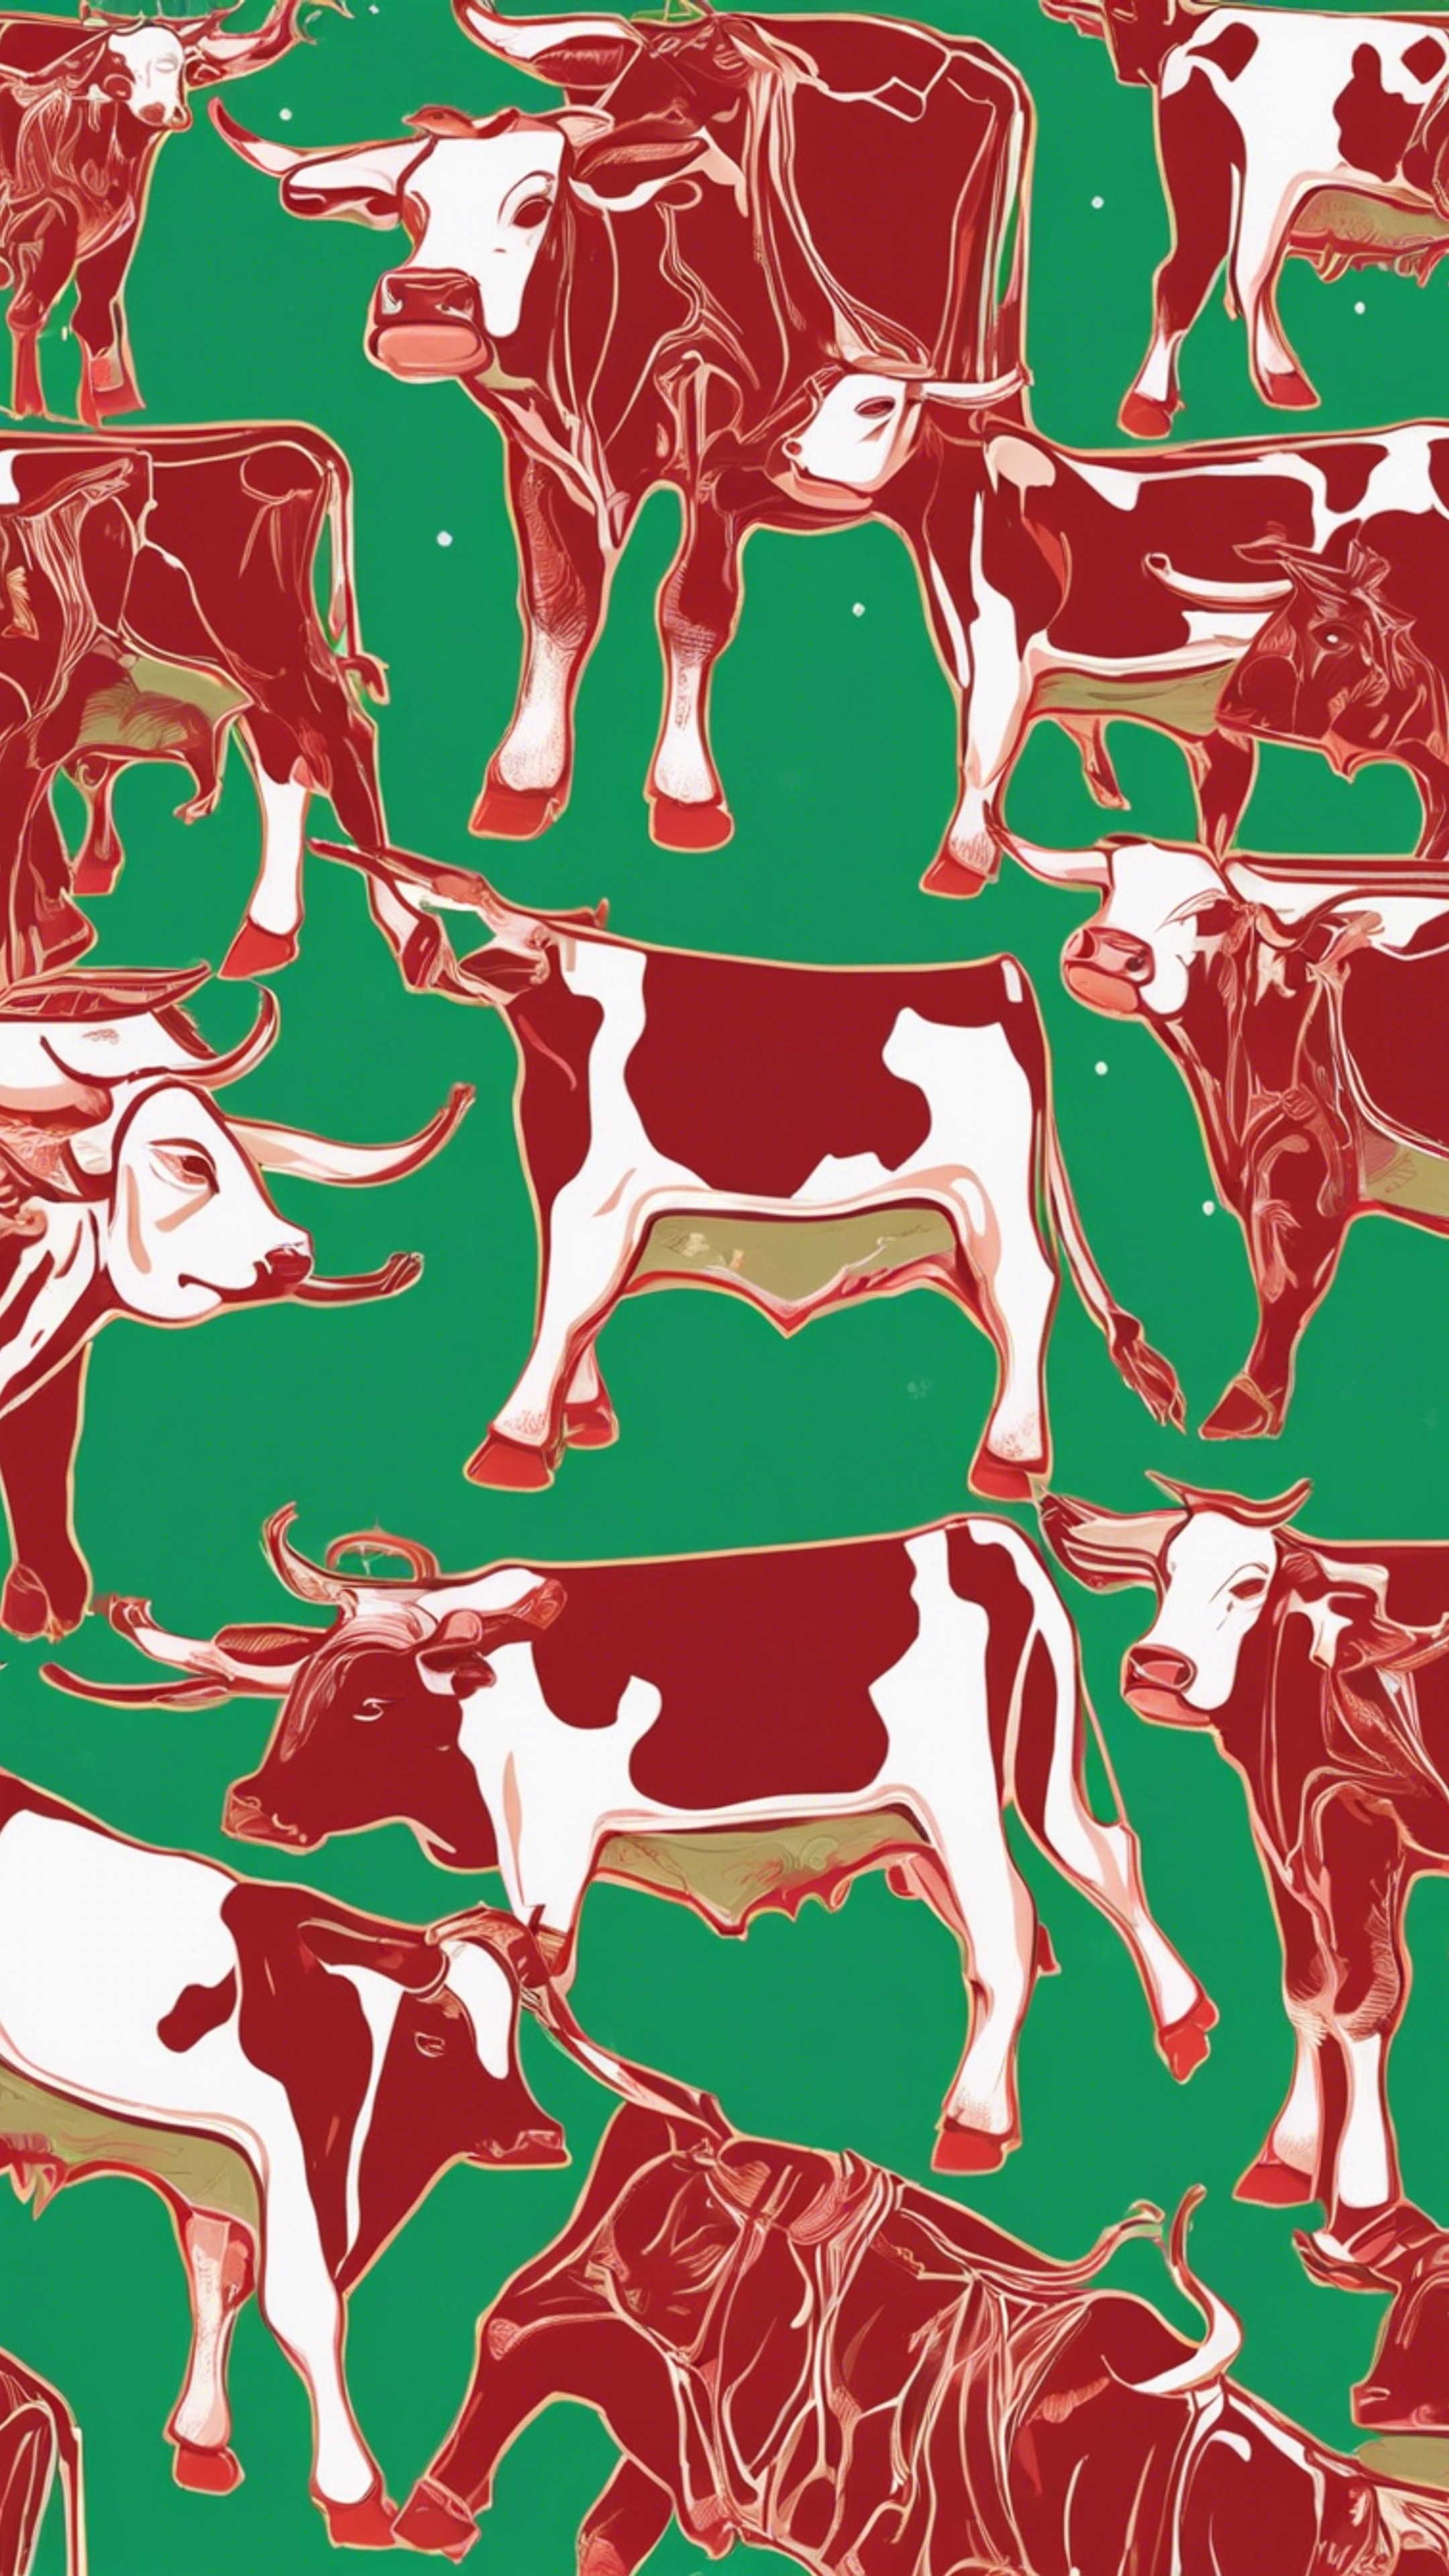 An abstract art featuring earthy green and vibrant red cow patterns. 벽지[bce8b500f11040f088c2]